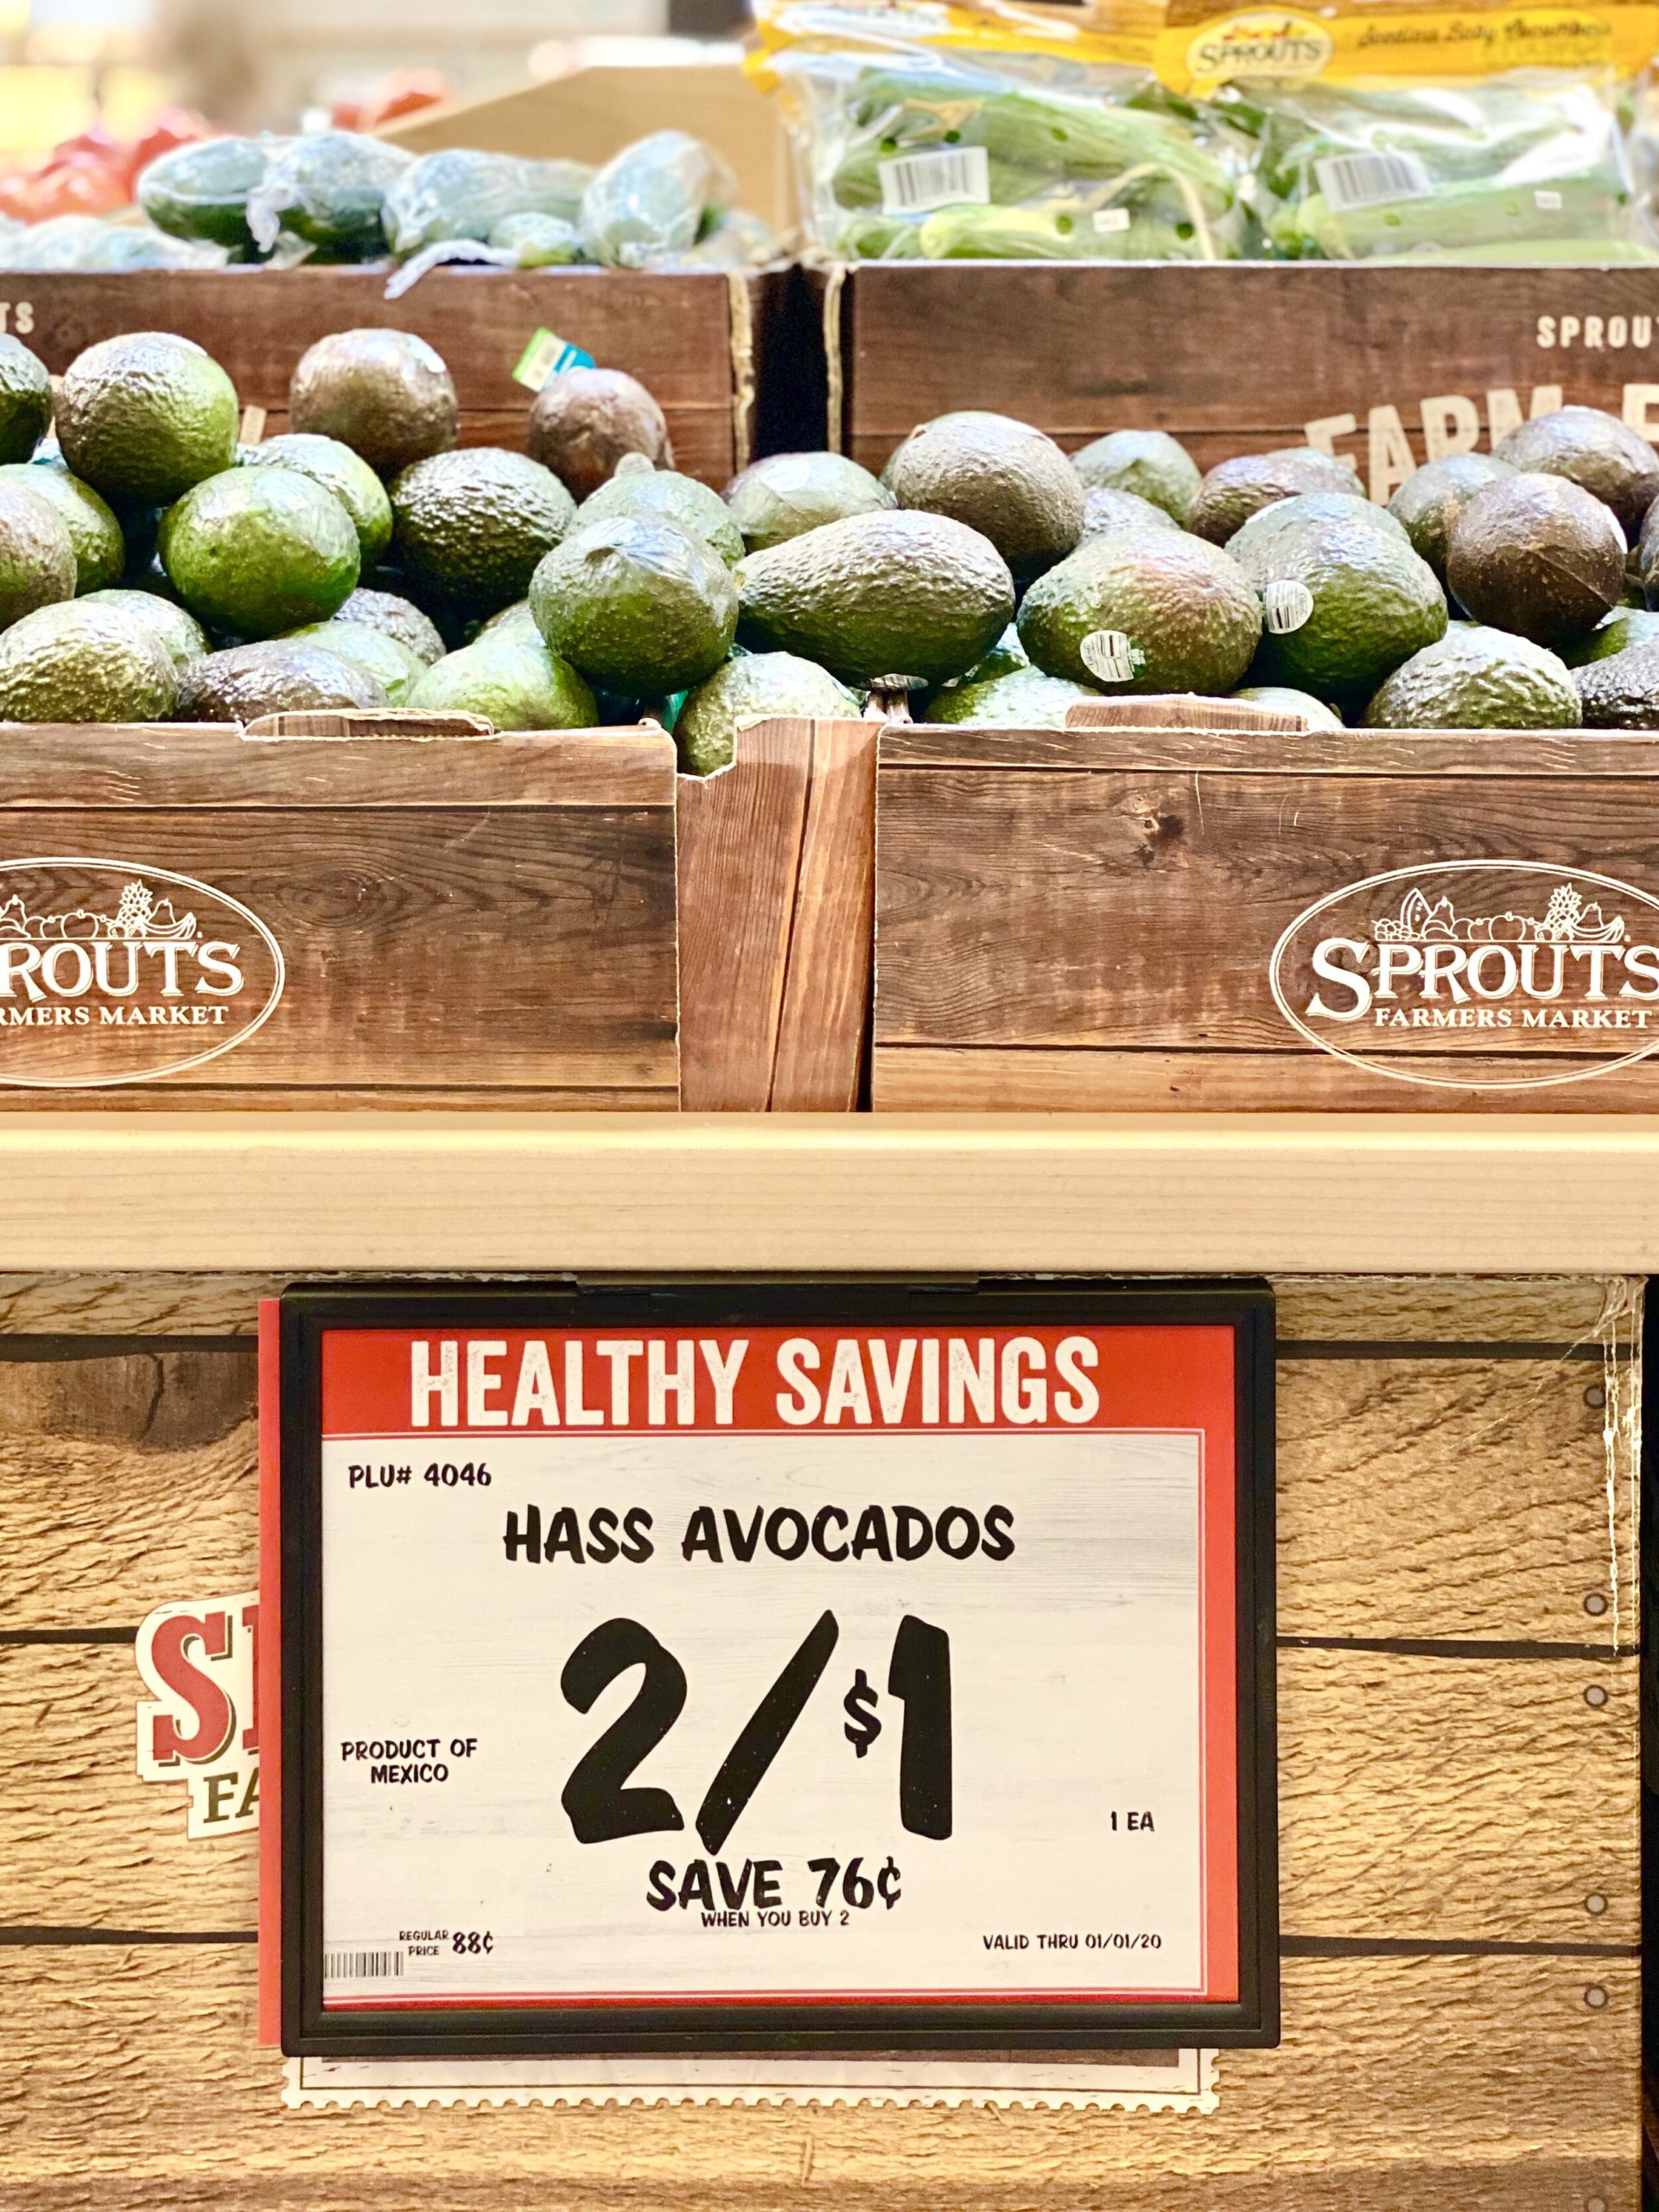 haas avocados sprouts 2 for $1